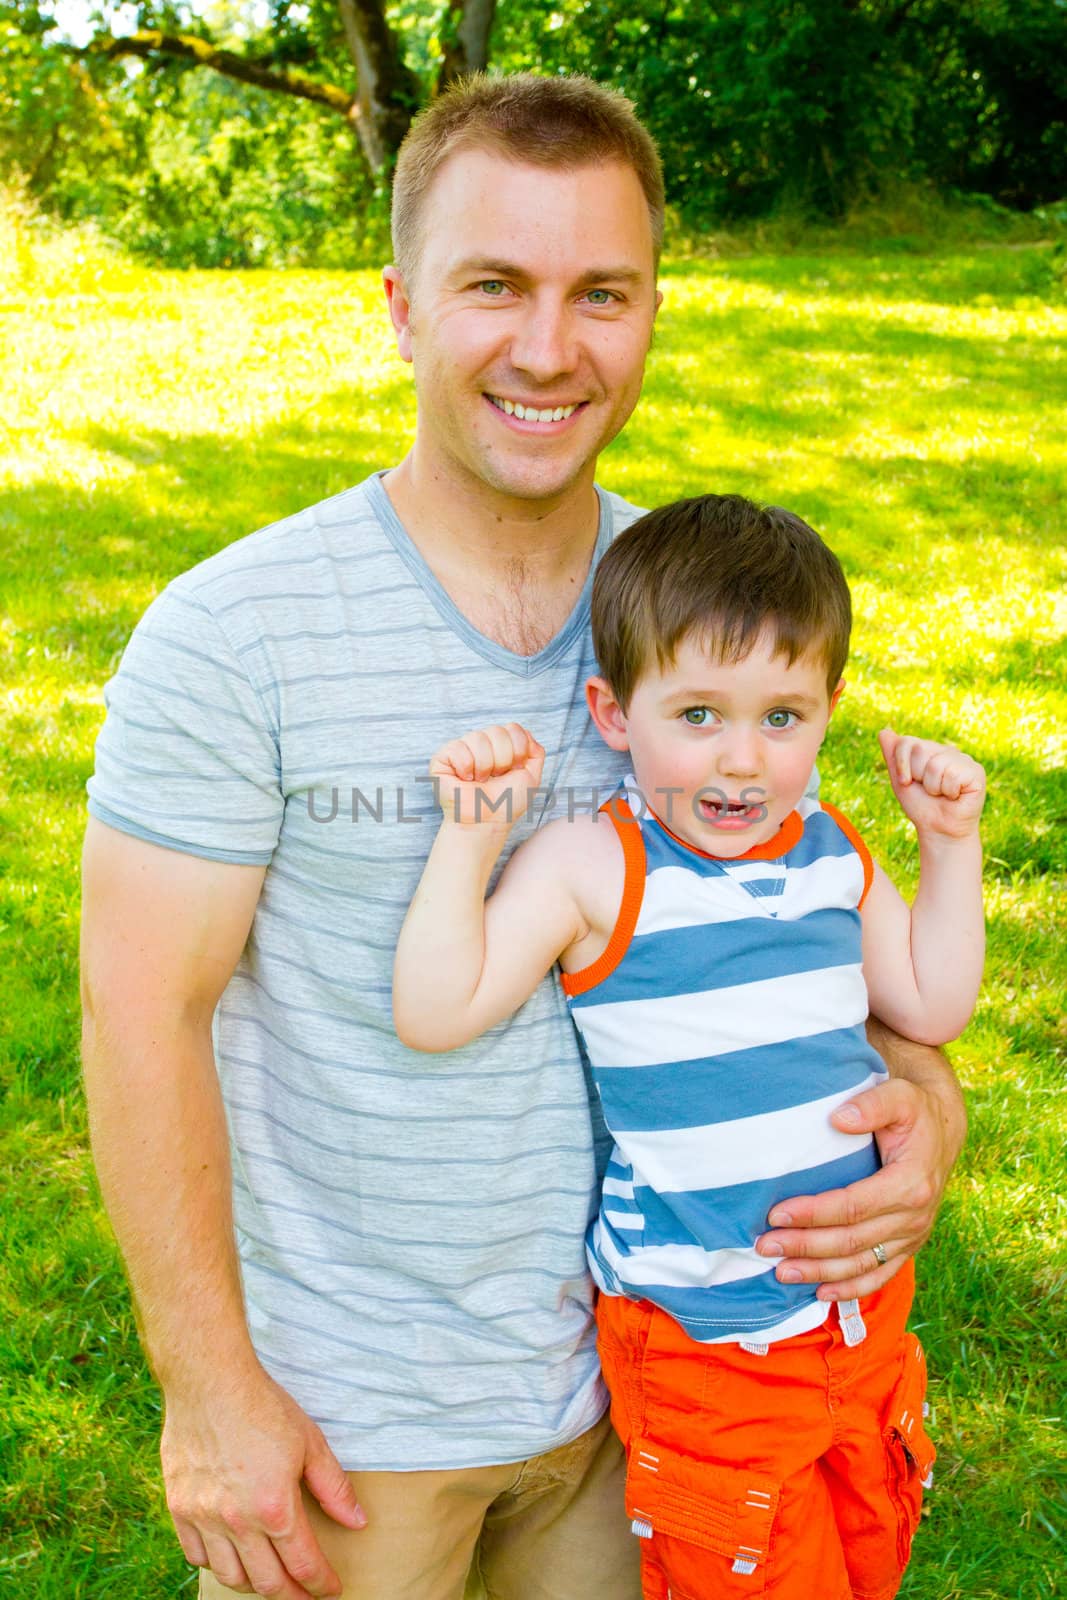 A father has his arm around his son outdoors.